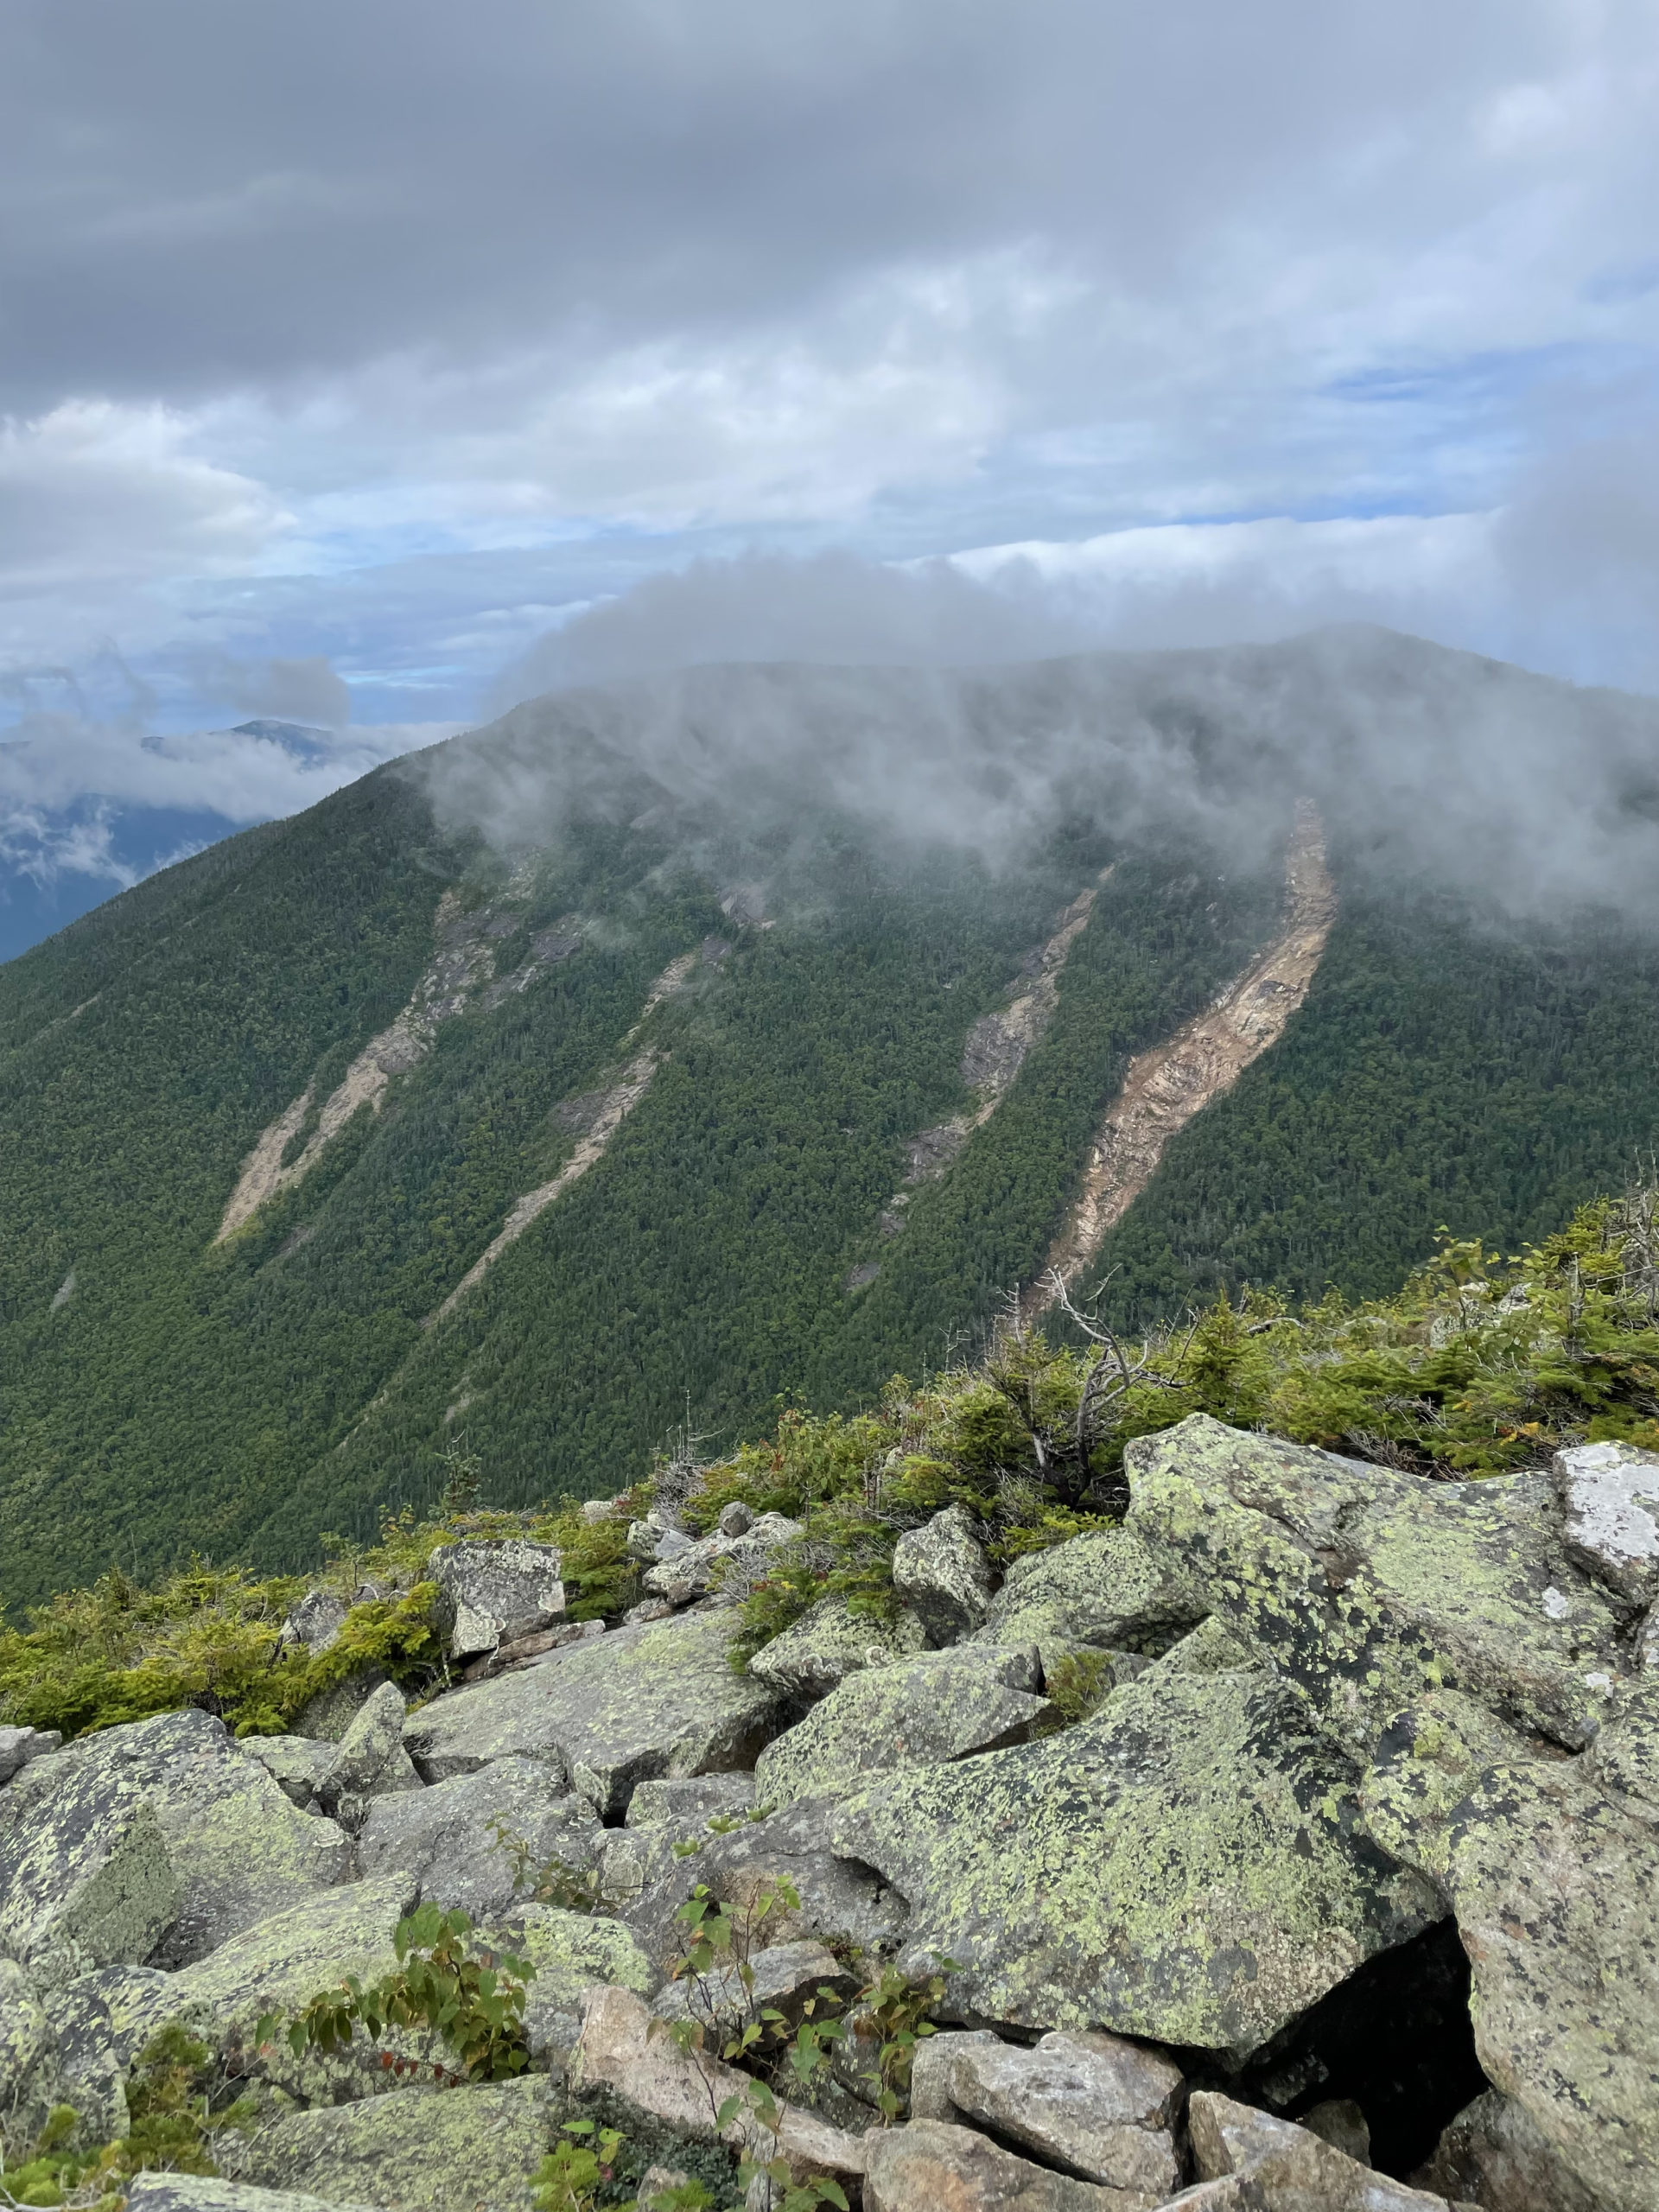 View from Bondcliff Trail, seen while hiking West Bond, Mt Bond, and Bondcliff in the White Mountains National Forest, New Hampshire